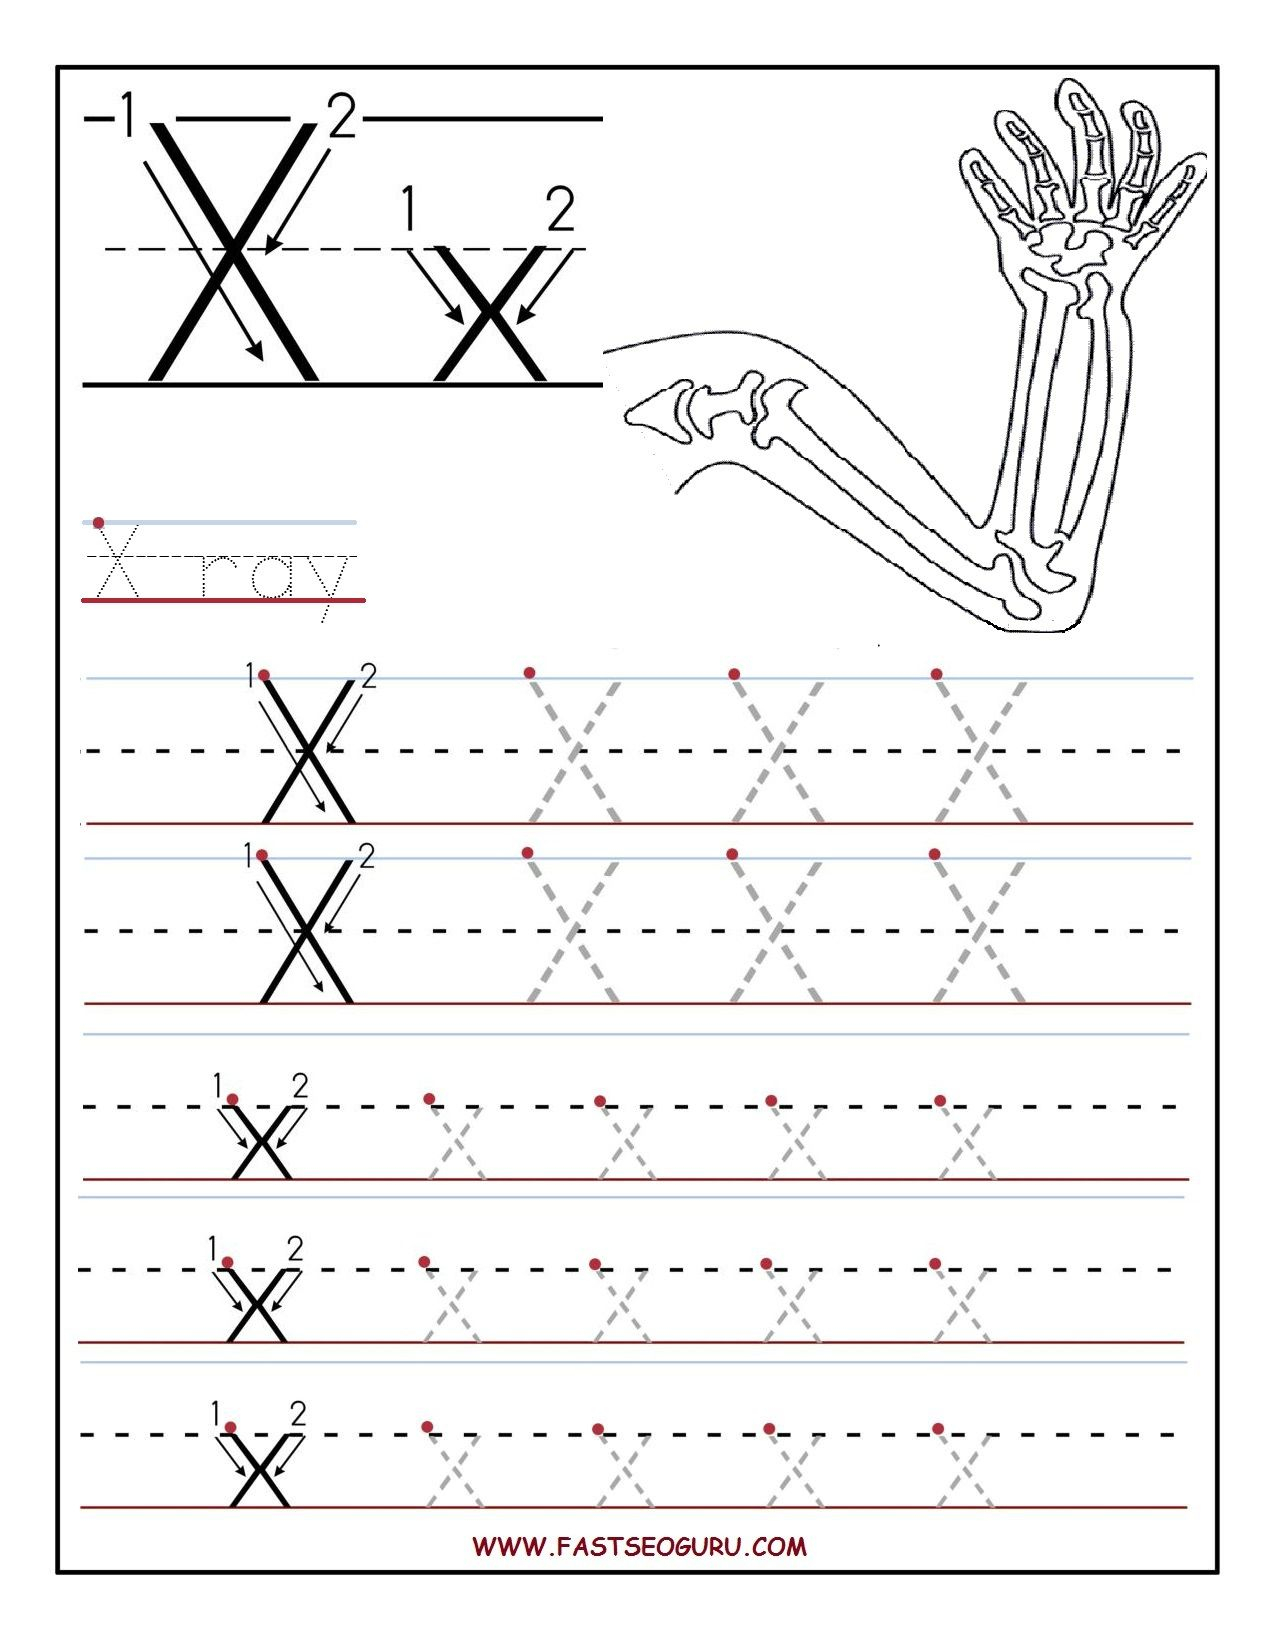 Printable Letter X Tracing Worksheets For Preschool 